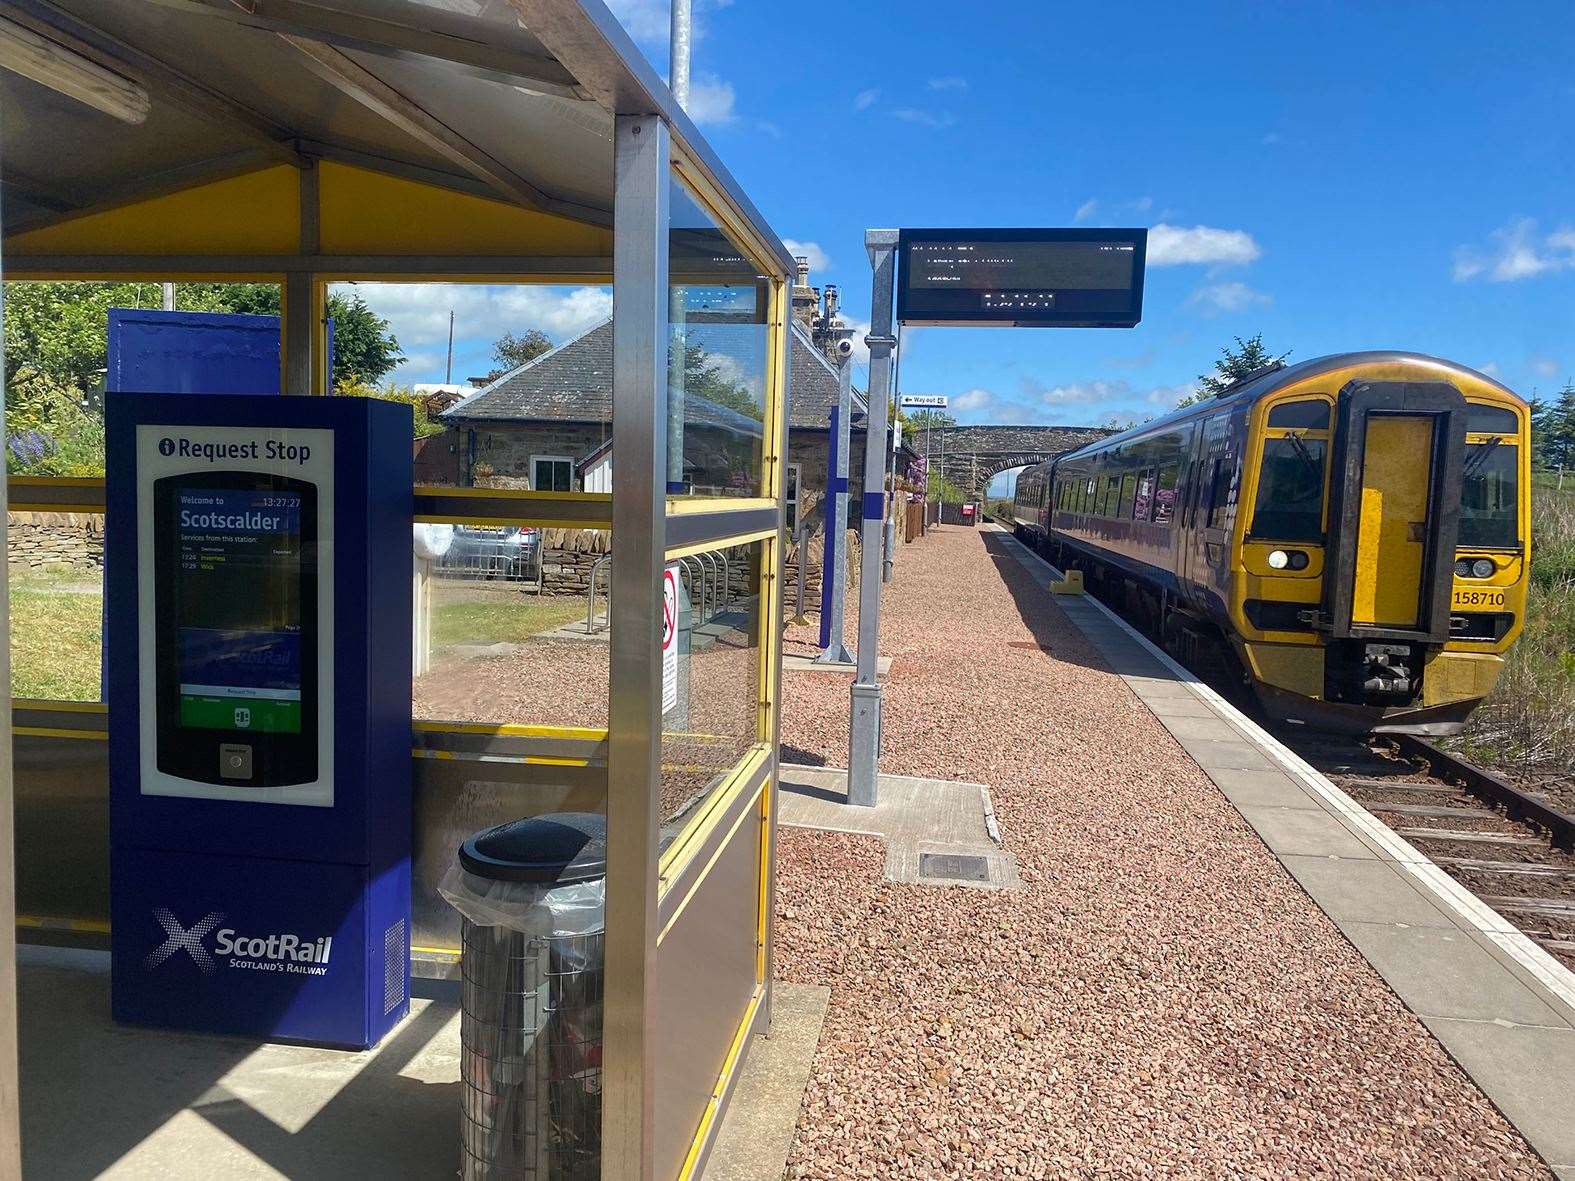 The kiosk at Scotscalder station will allow passengers to alert the driver without using hand signals. Picture: Network Rail